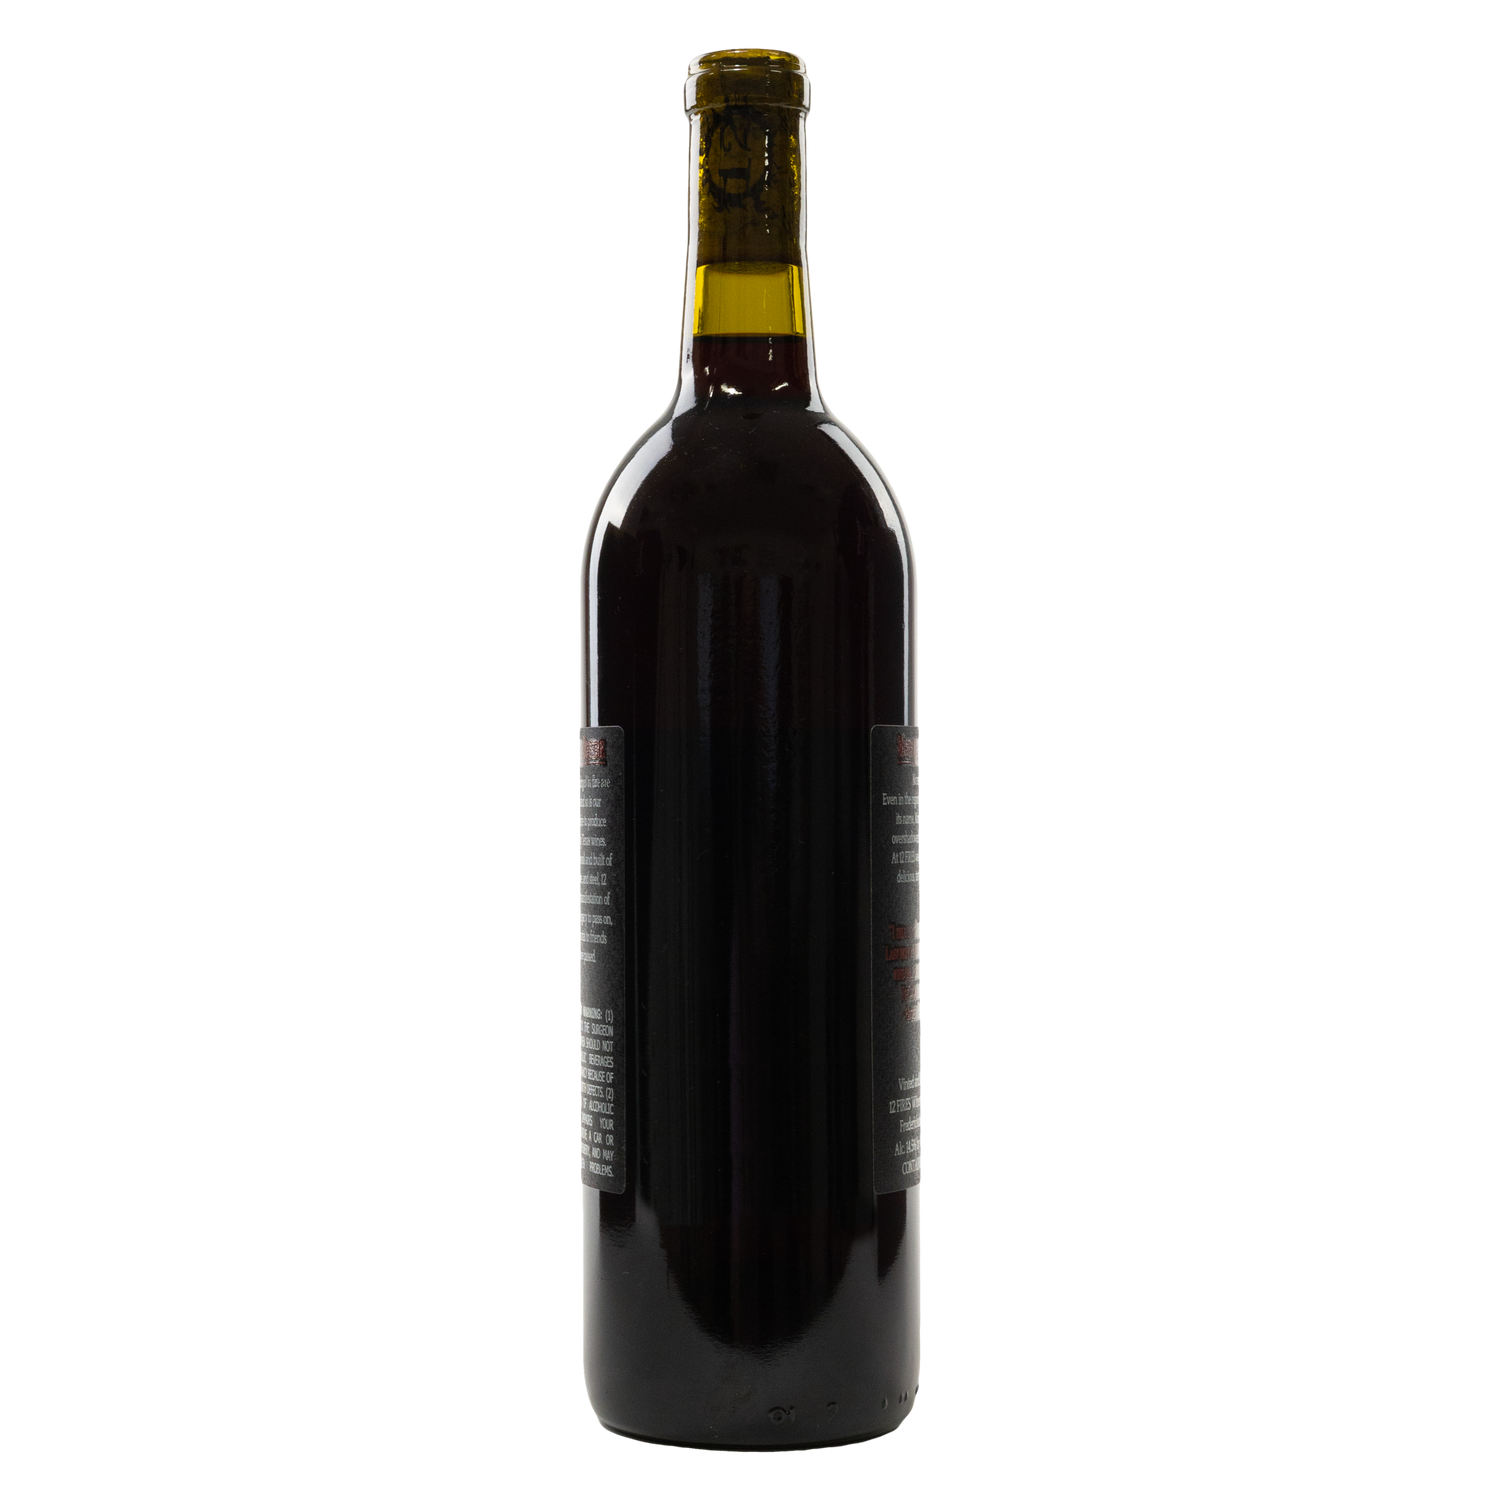 In Store Pick up or Local Delivery Only: Montepulciano